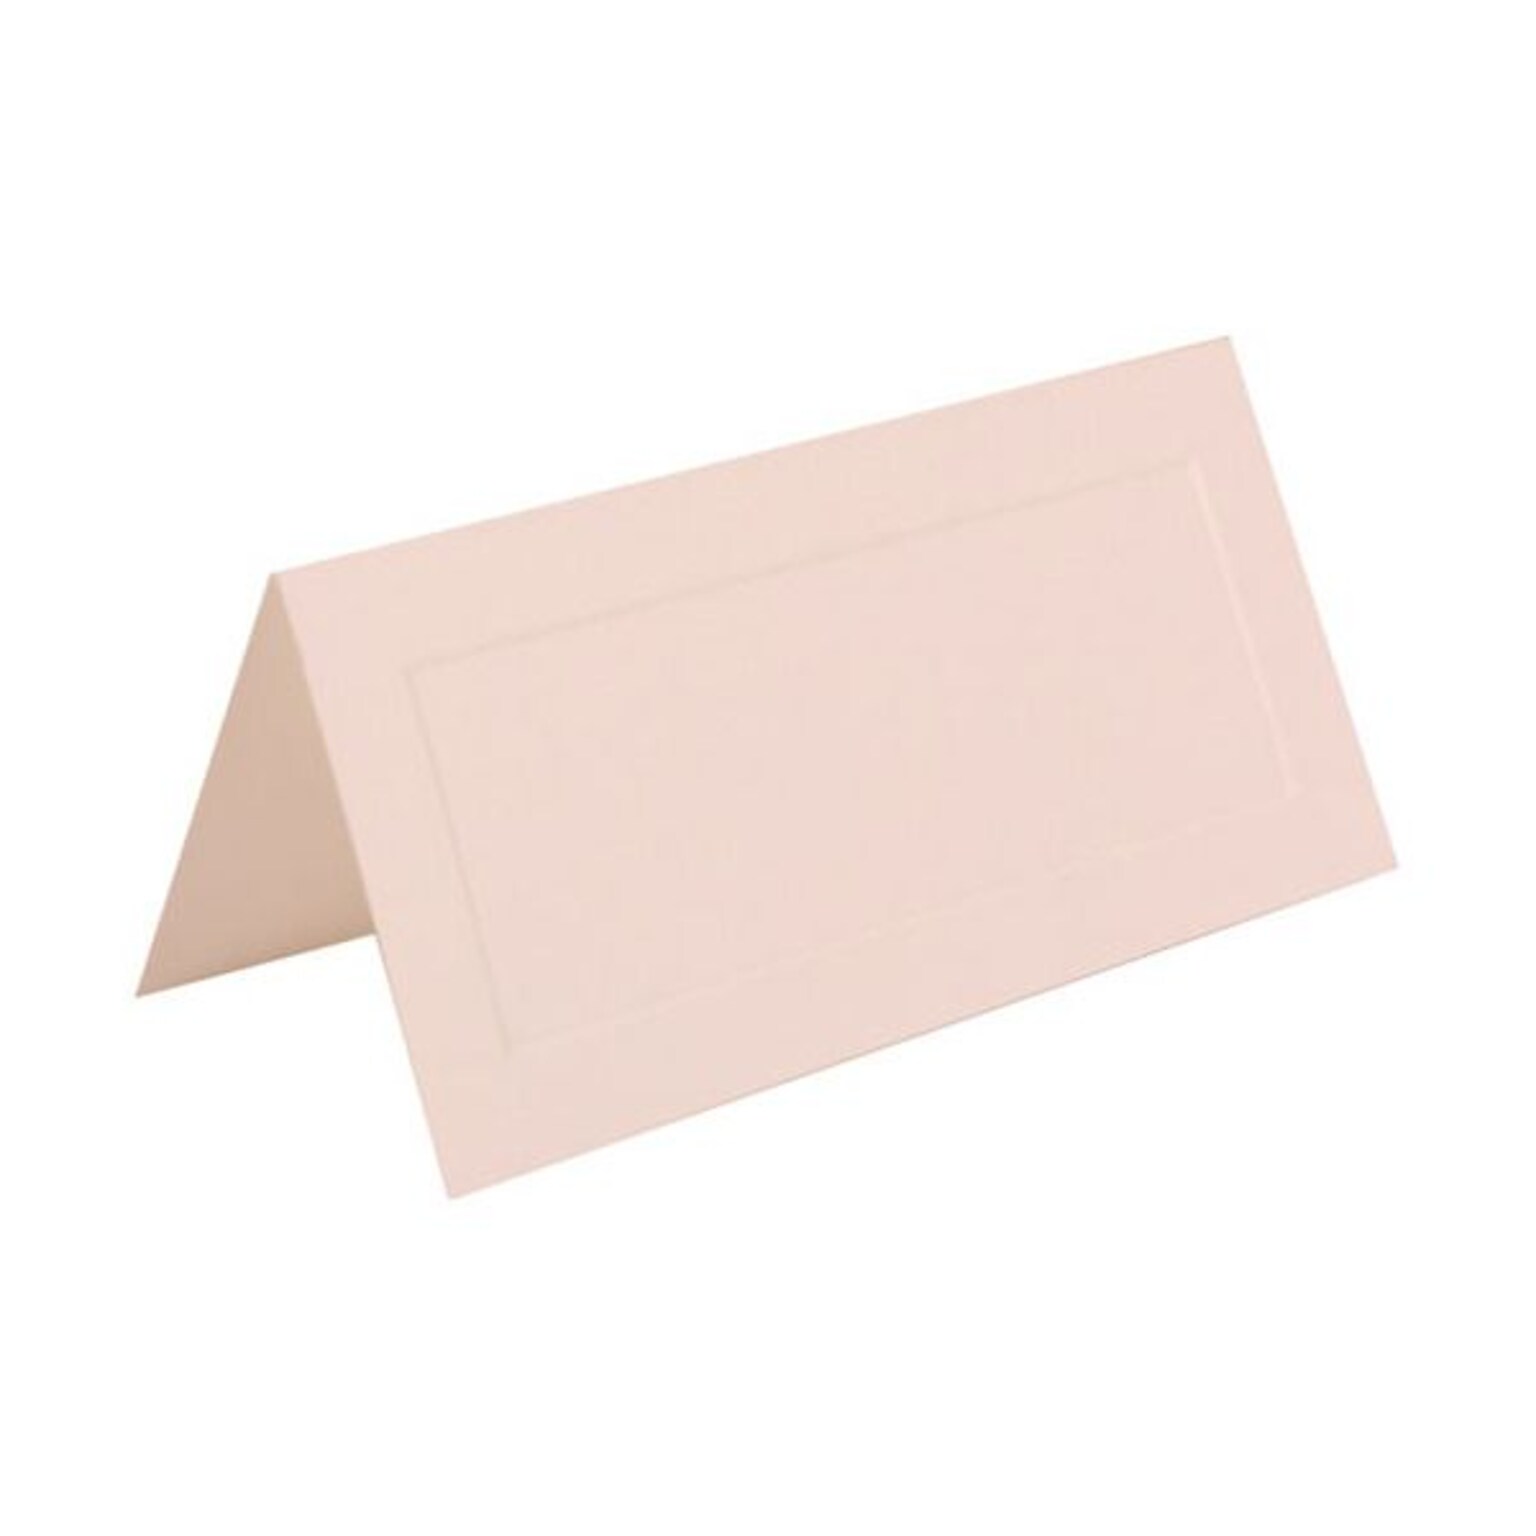 JAM Paper® Foldover Placecards, 2 x 4.25, White with Embossed Border place cards, 100/pack (312125232)